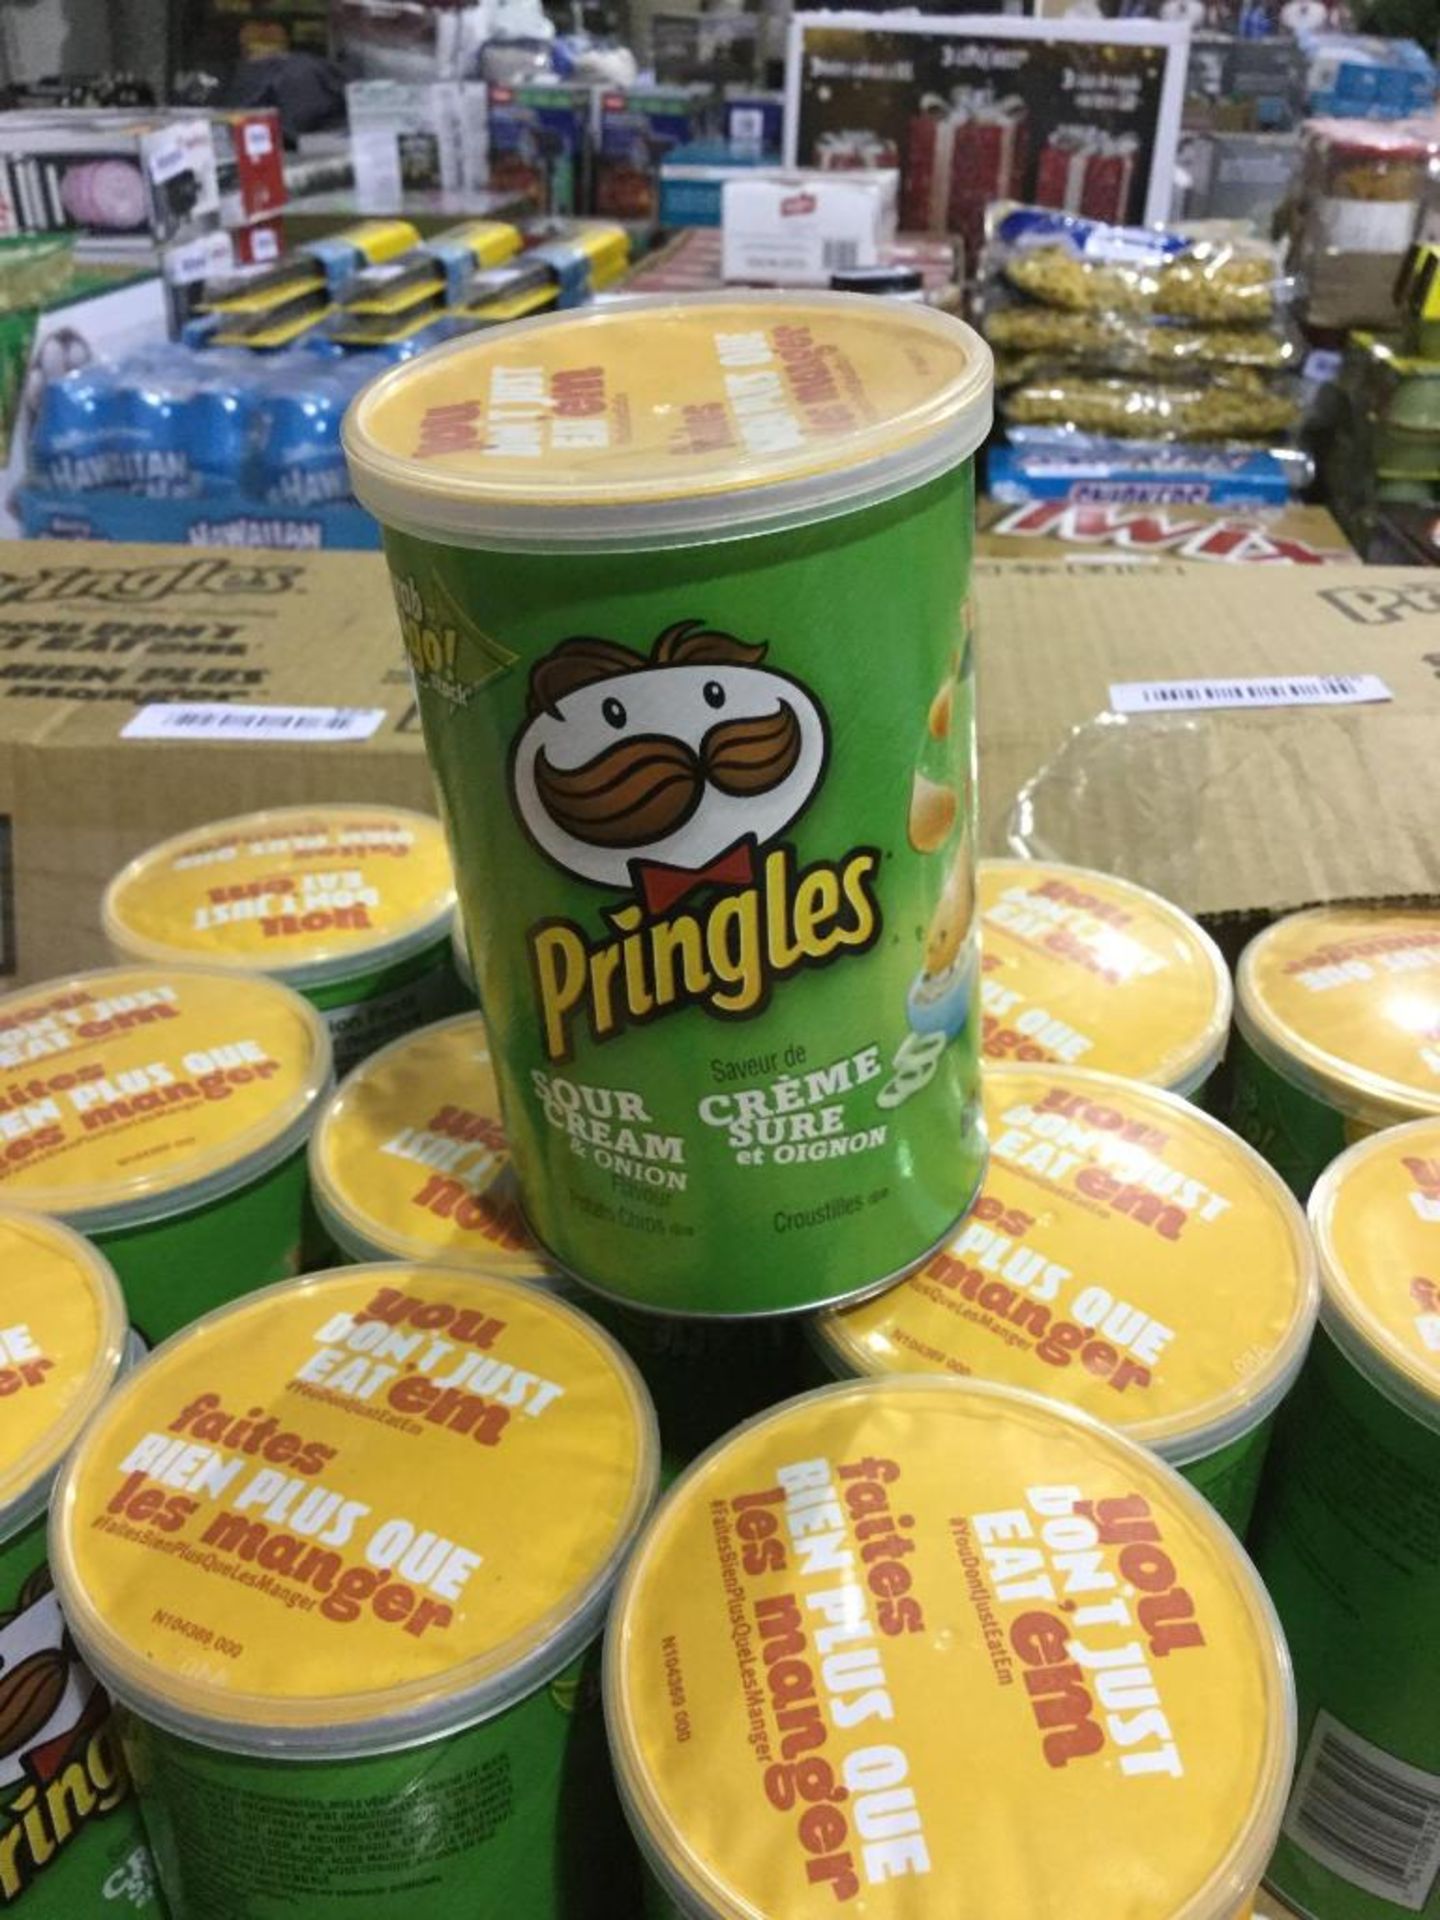 Case of 12 x 68 g Cans Pringles Sour Cream and Onion